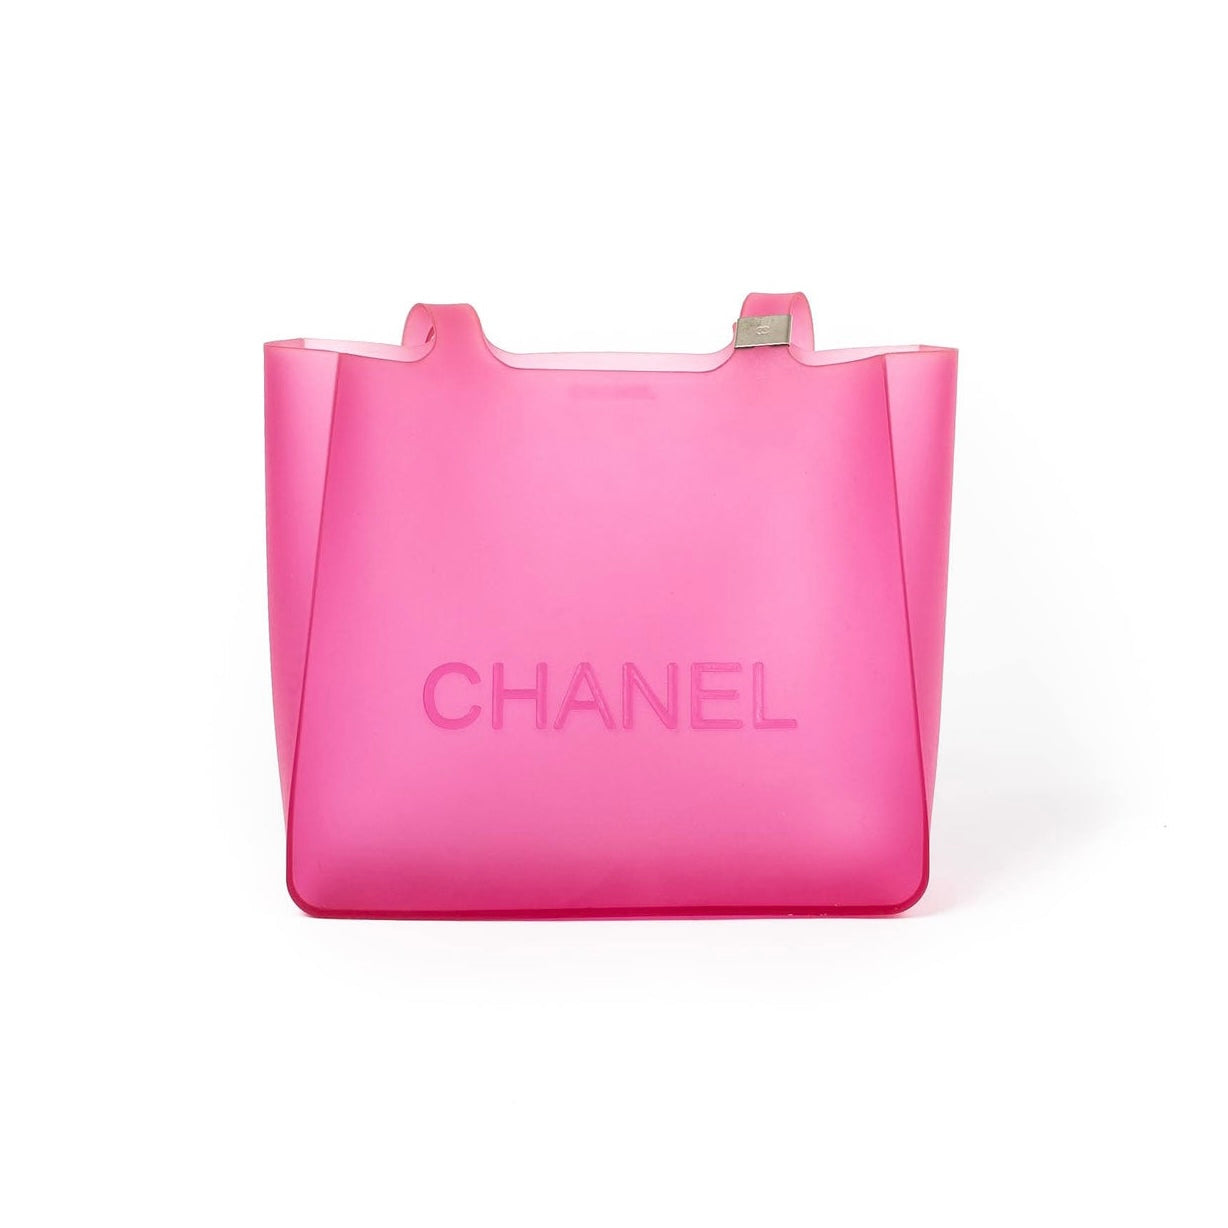 Chanel Pink Jelly Tote – My Next Fit